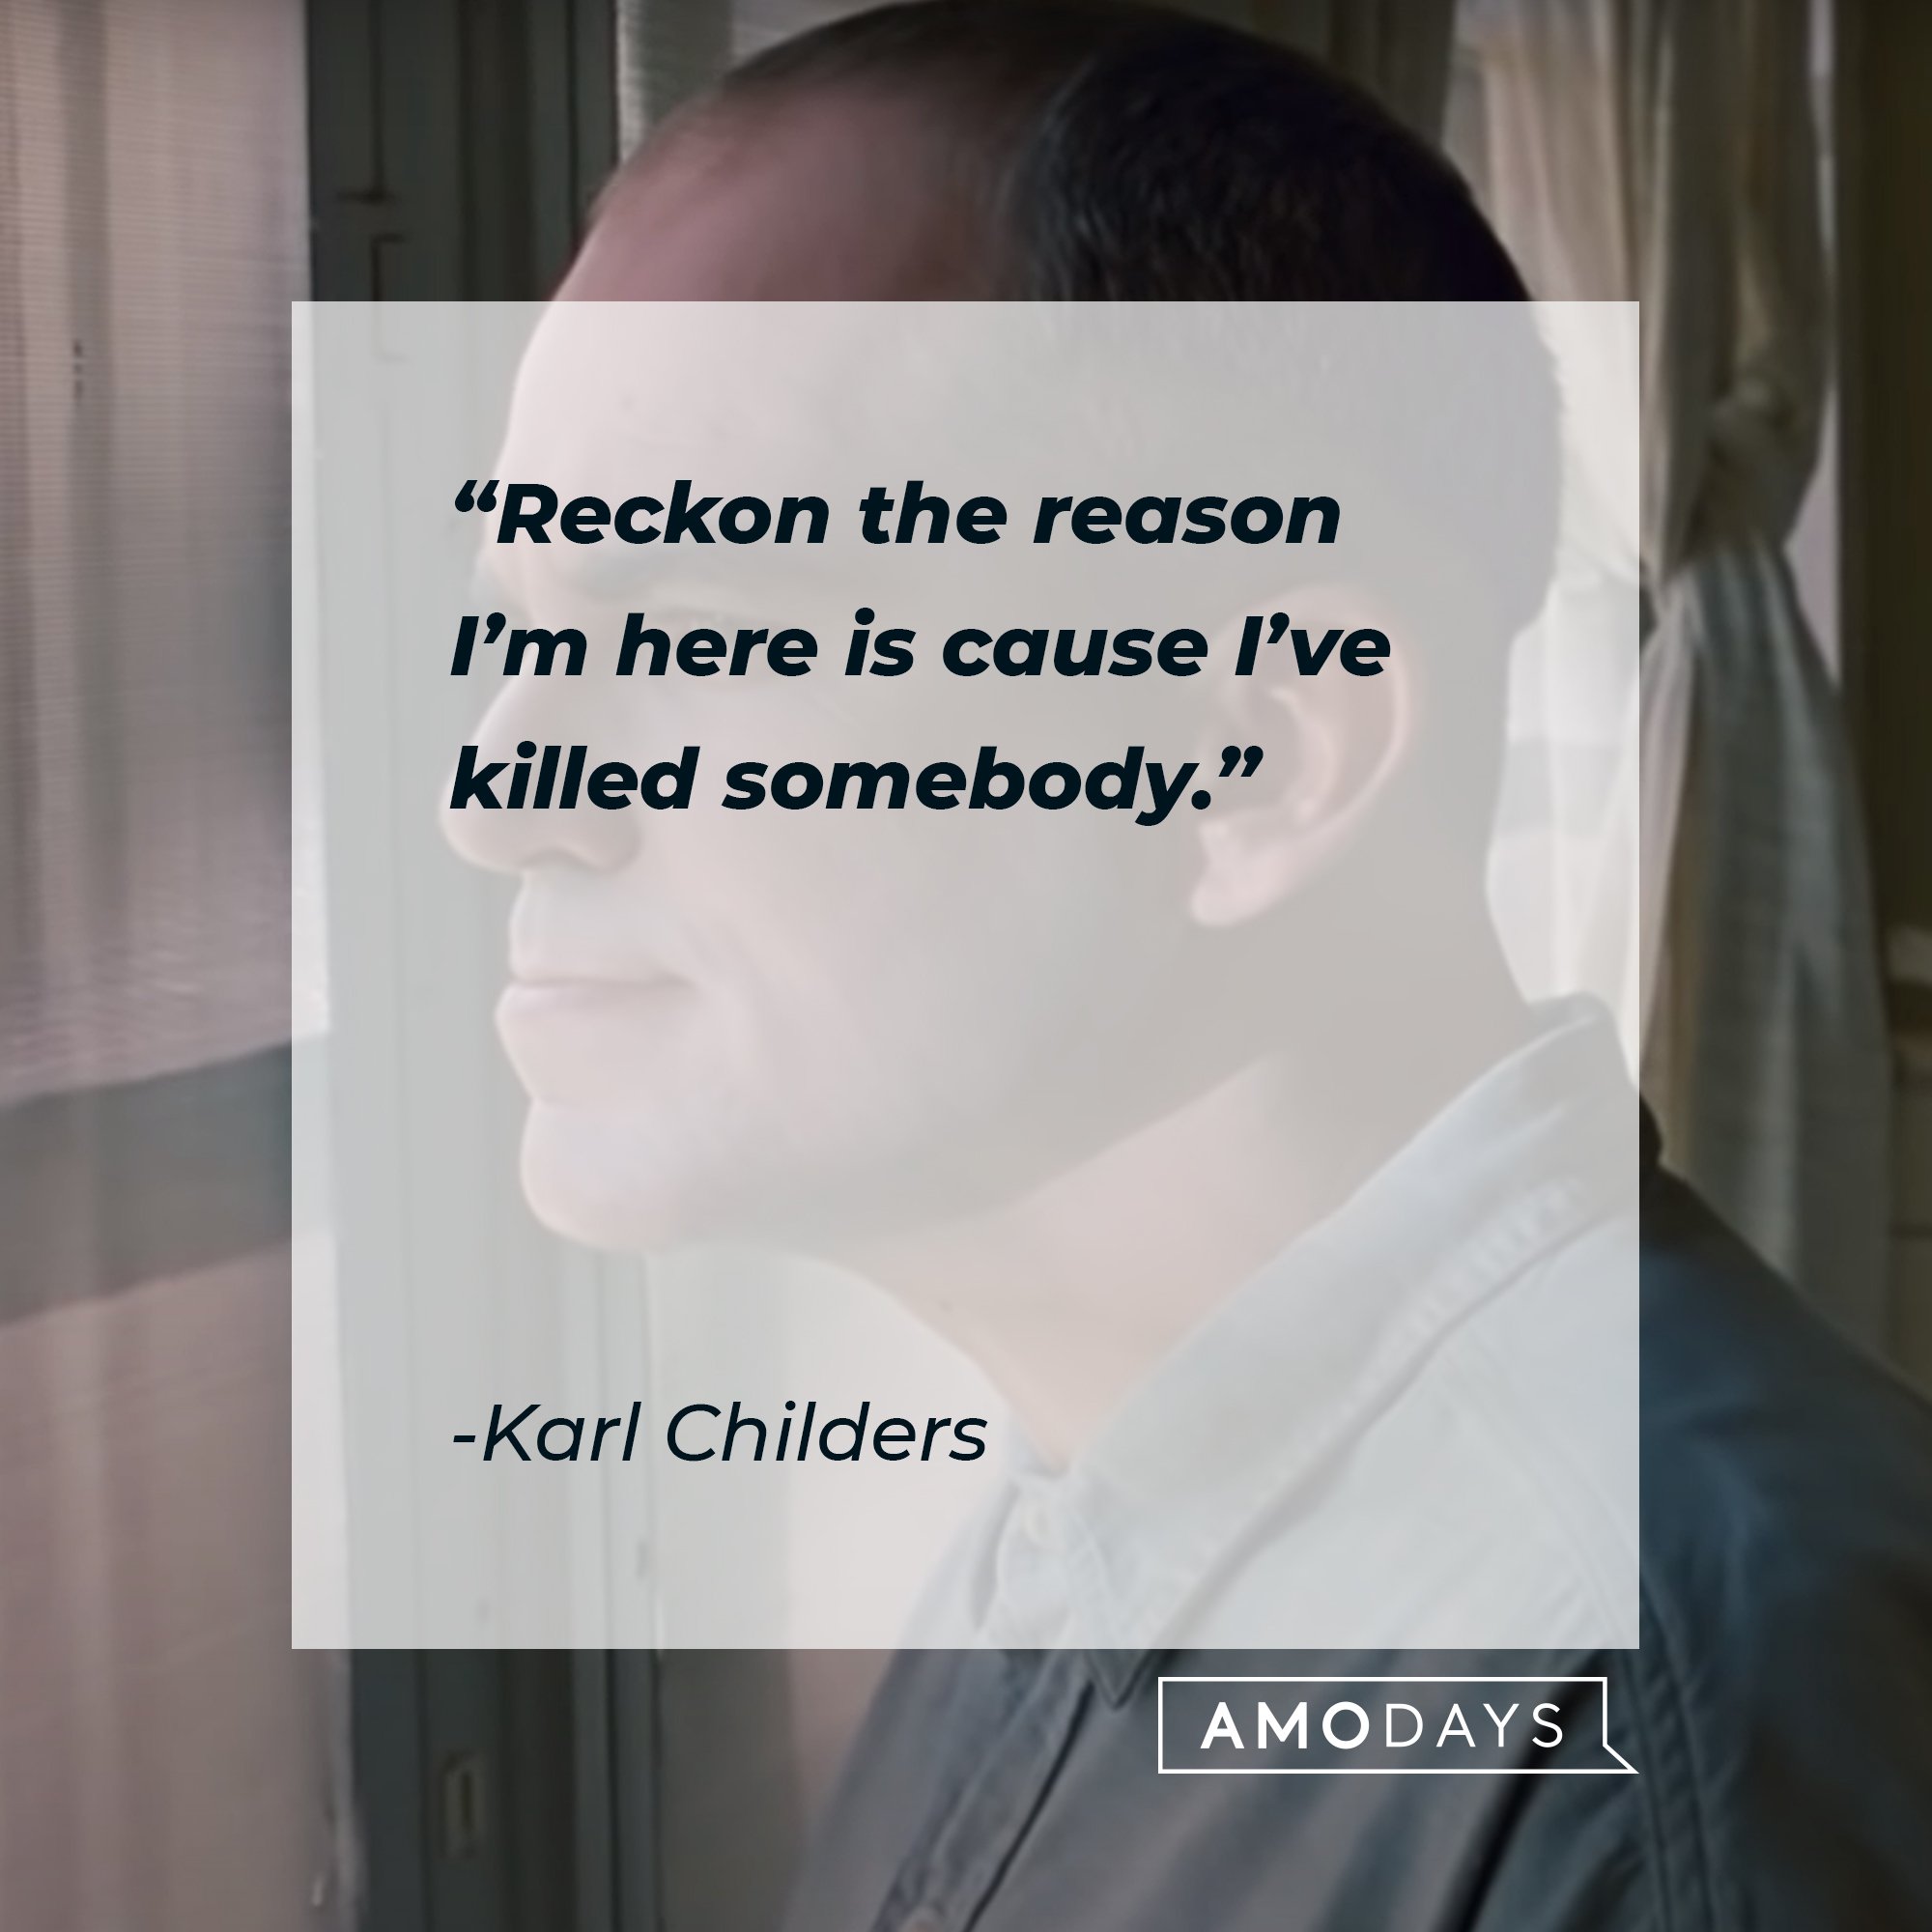 Karl Childers' quote:  "Reckon the reason I'm here is 'cause I've killed somebody.” | Image: AmoDays